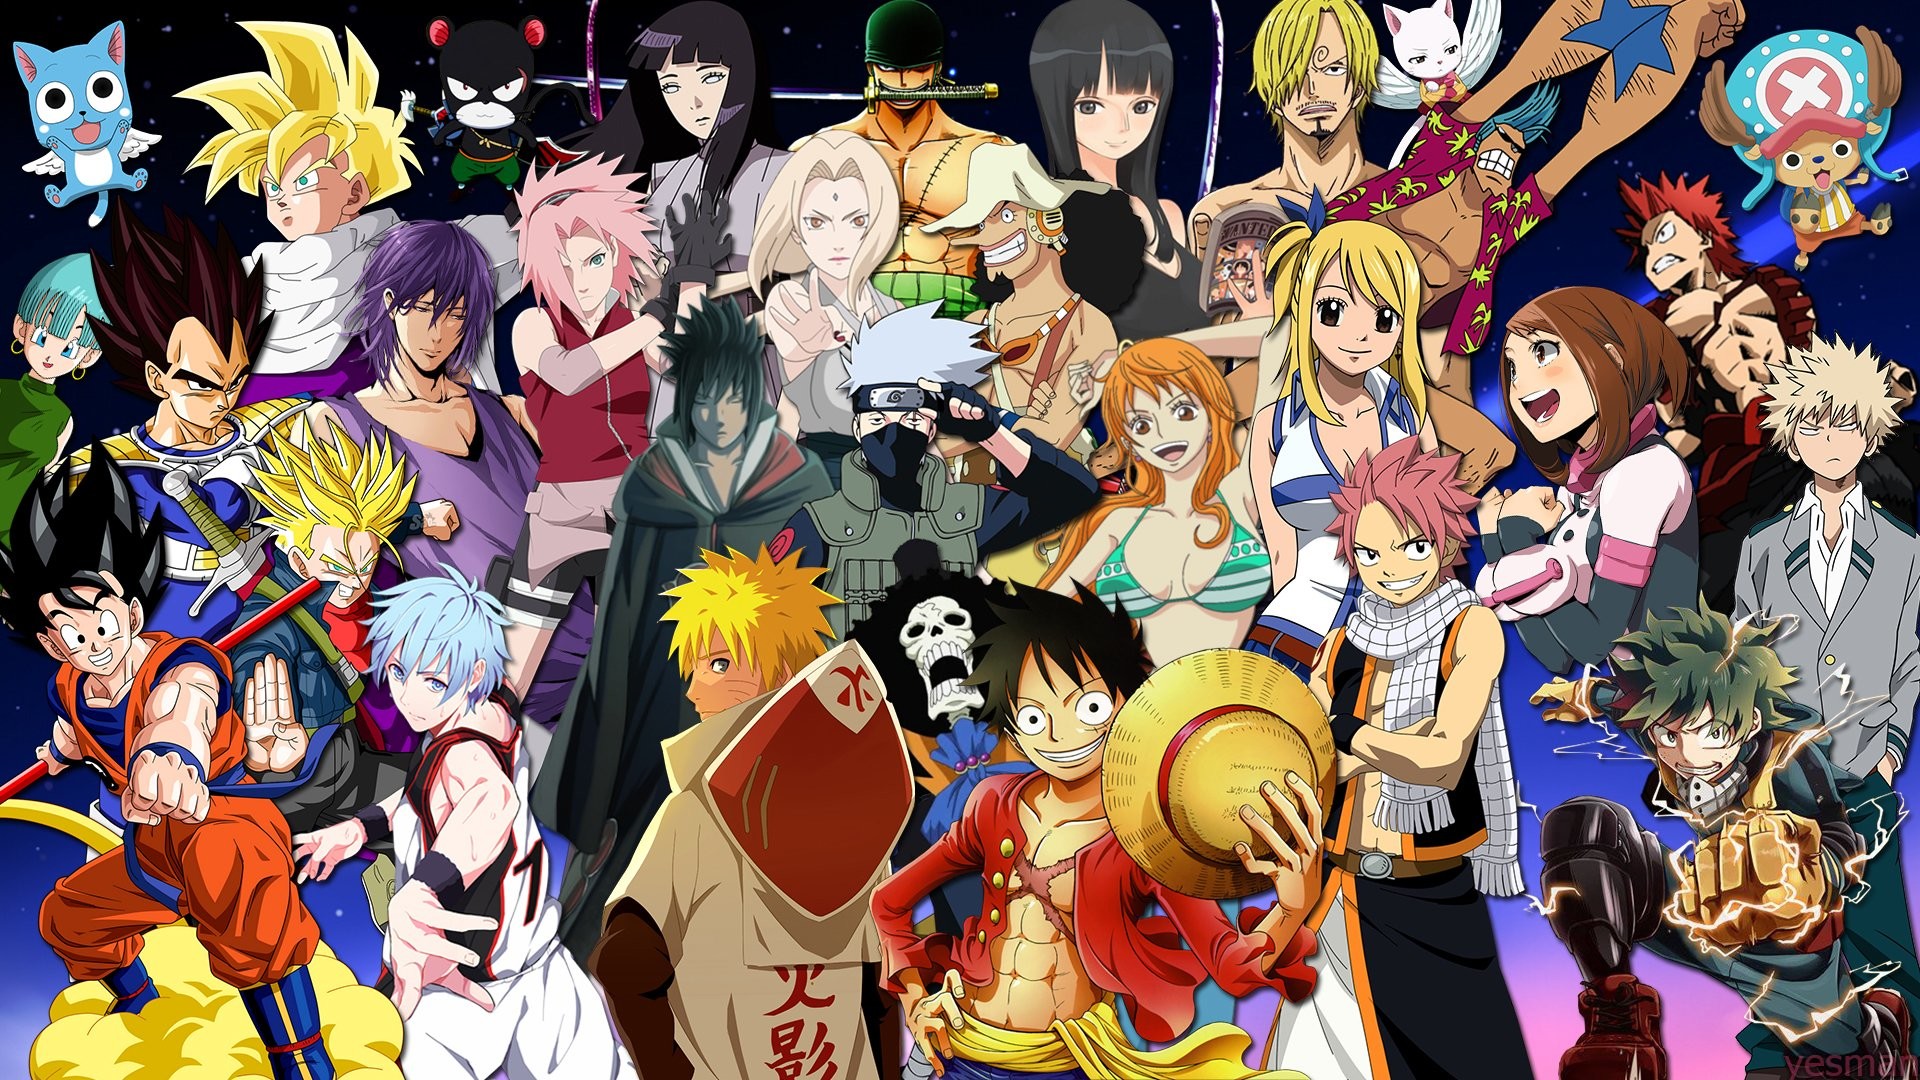 1920x1080 Anime - Crossover Nami (One Piece) Panther Lily (Fairy Tail) Charles (